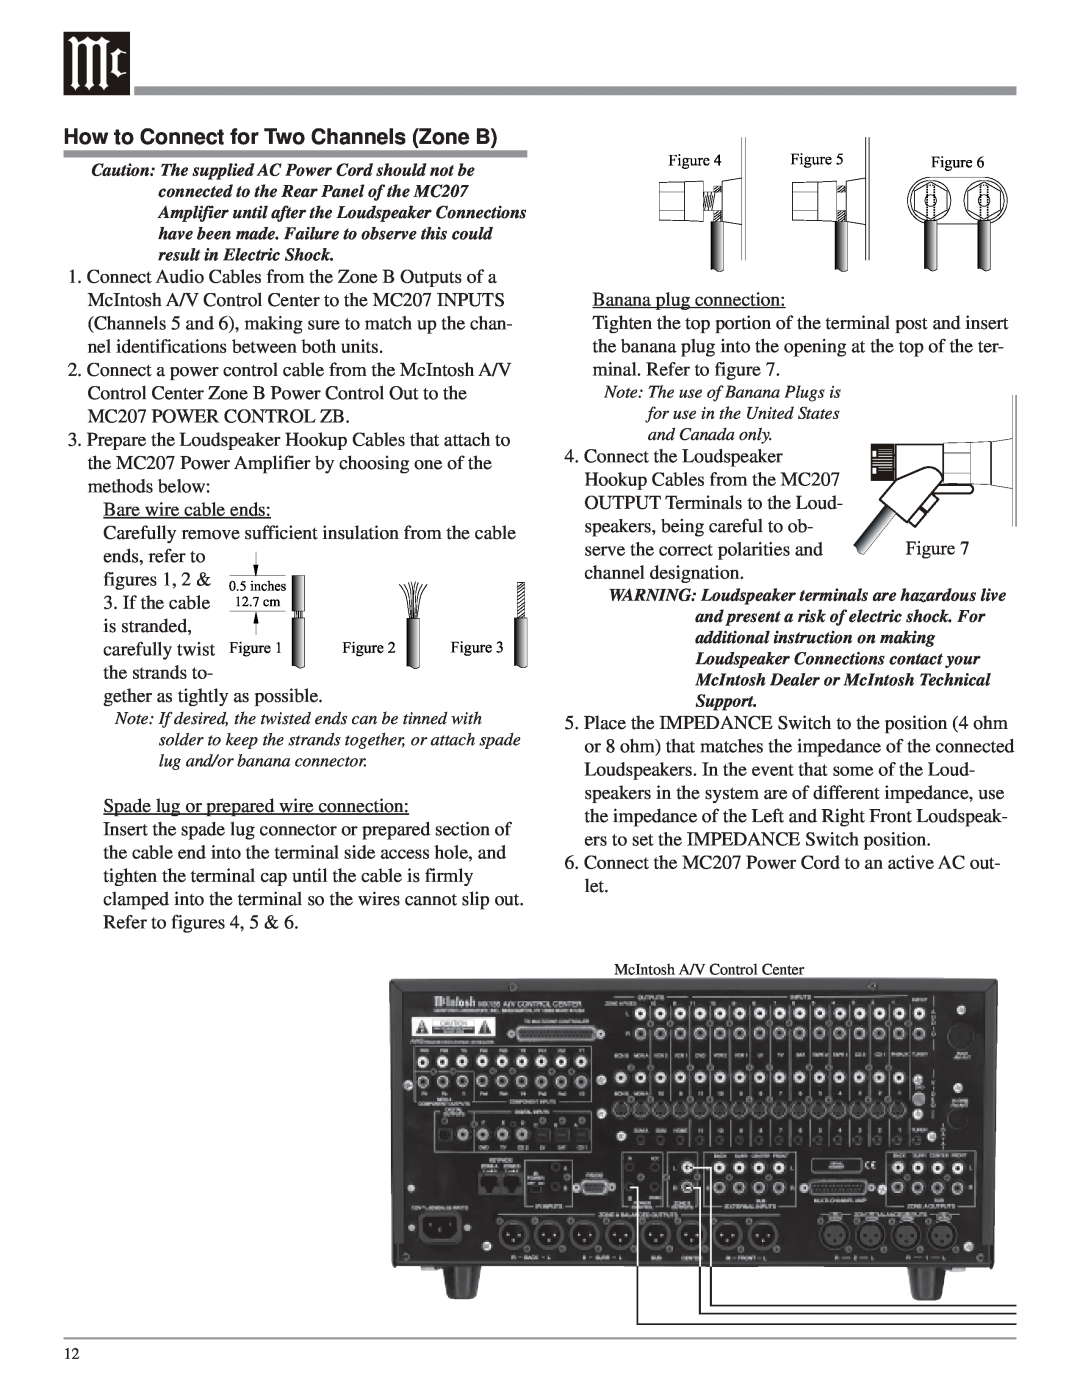 McIntosh MC207 owner manual How to Connect for Two Channels Zone B 